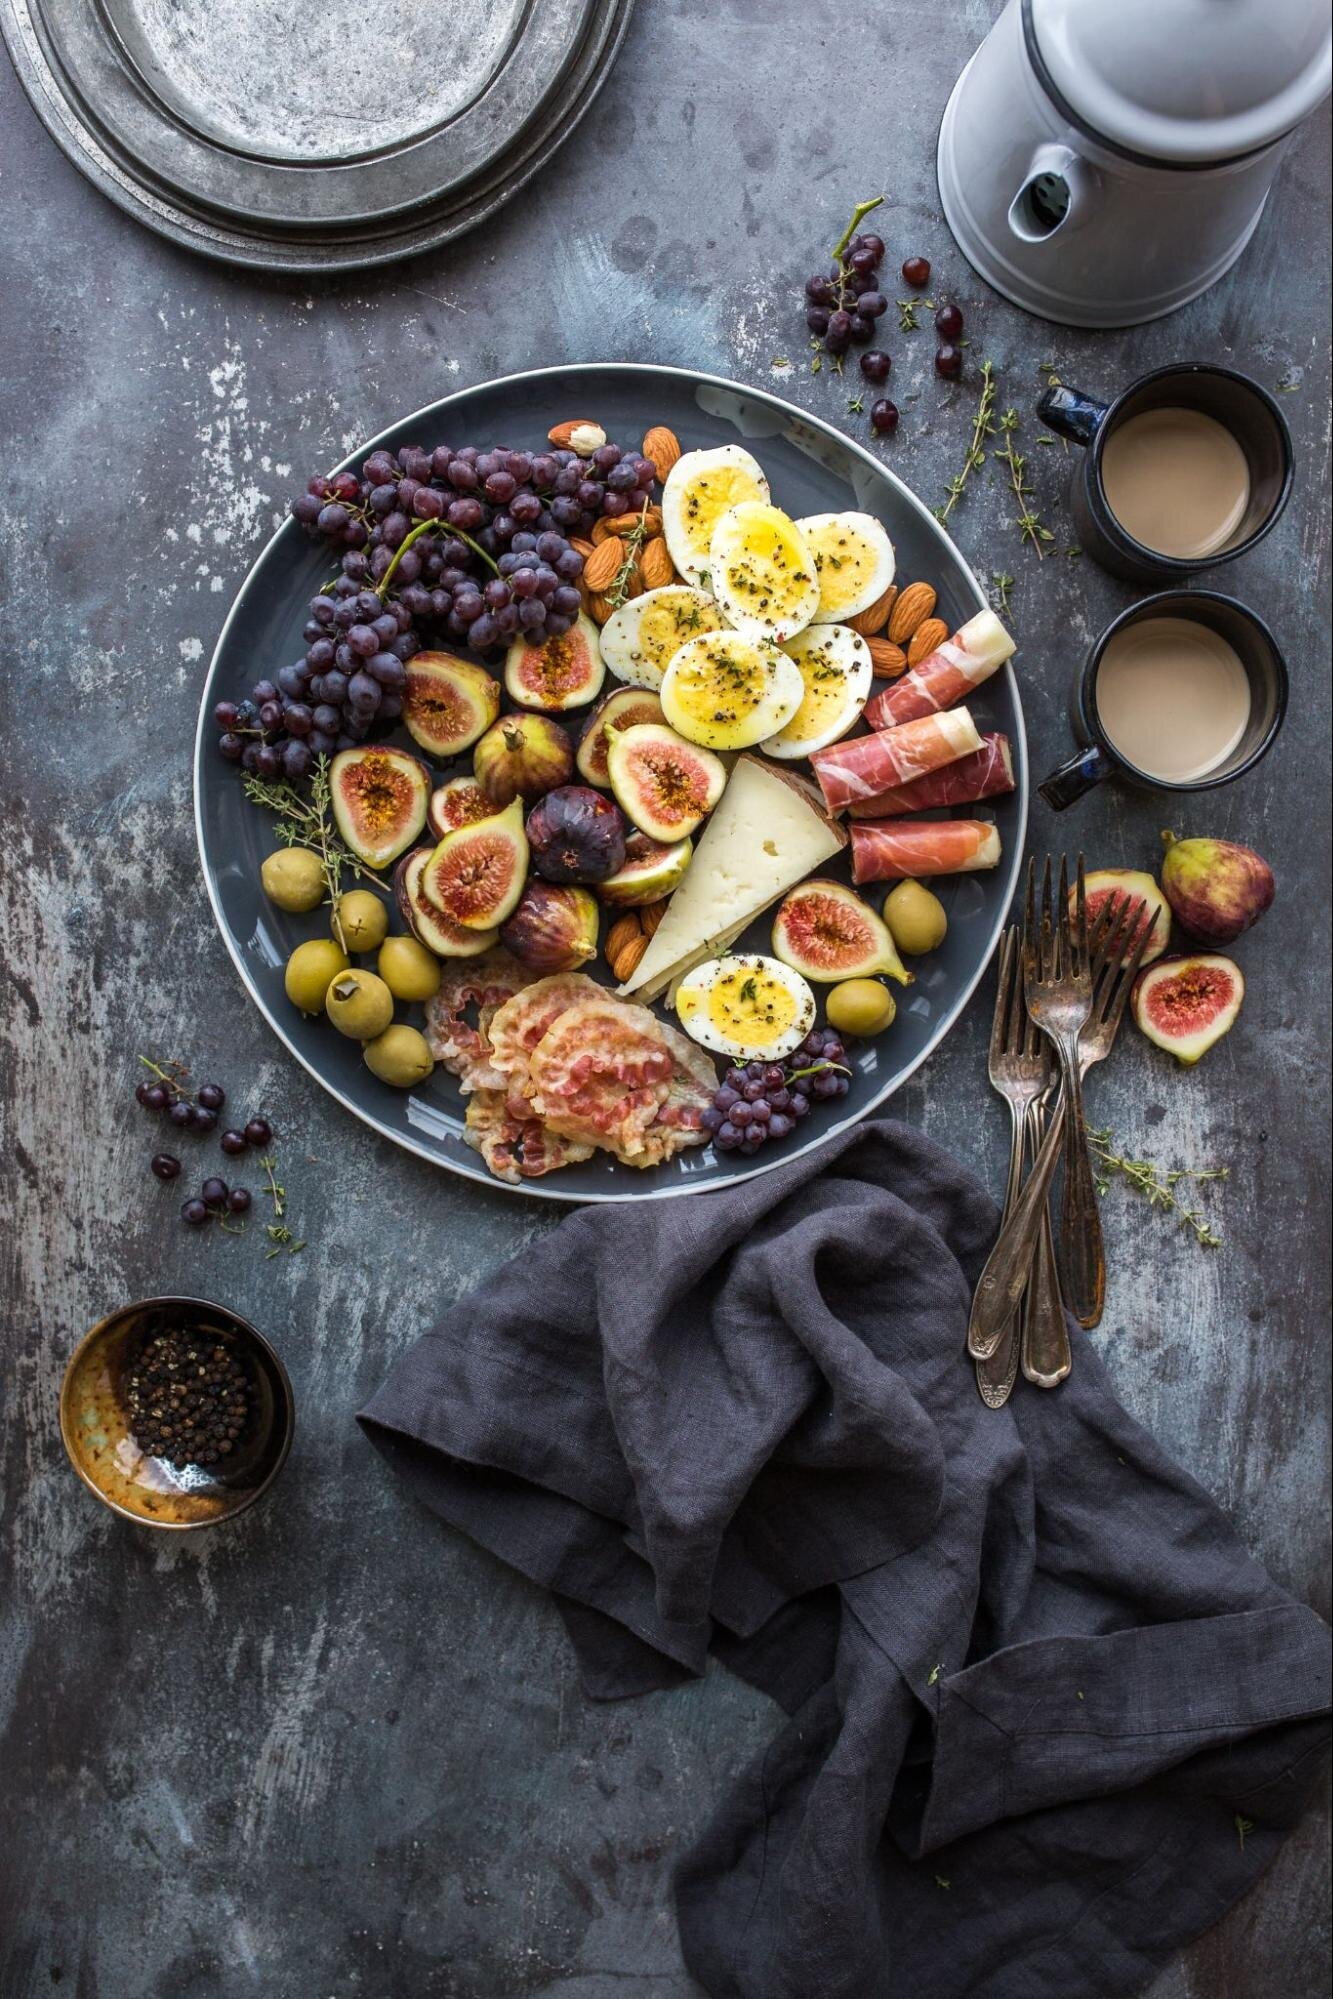 Image: boiled egg halves, figs, green olives, and purple table grapes with procusto and a cheese wedge on a black plate